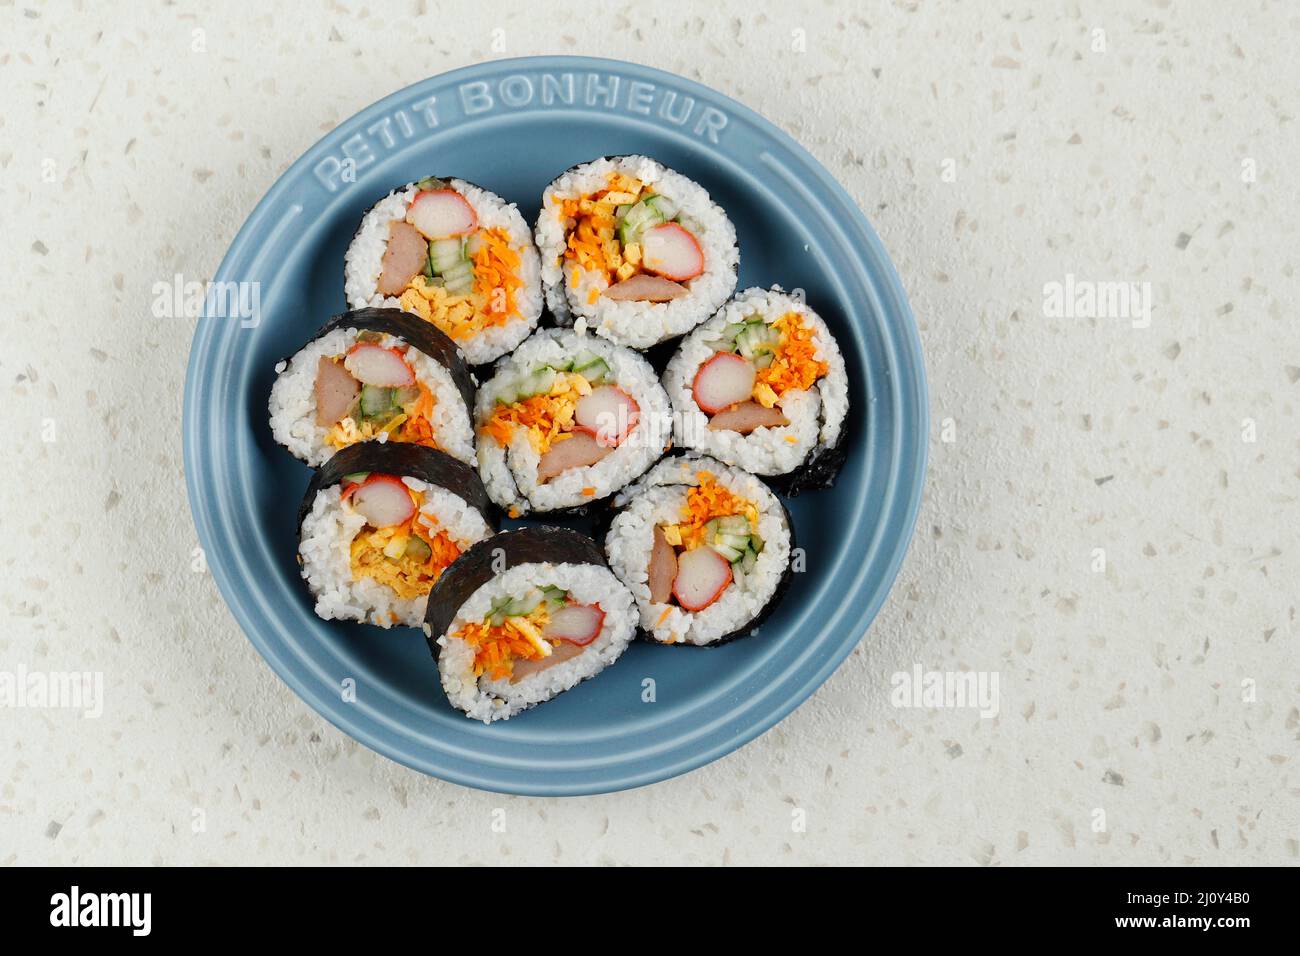 Gimbap or Kimbap, Korean Roll Rice with Nori Laver, Egg, Crab Stick, carrot, and Cucumber. Top View on Ceramic Plate, Copy Space Stock Photo